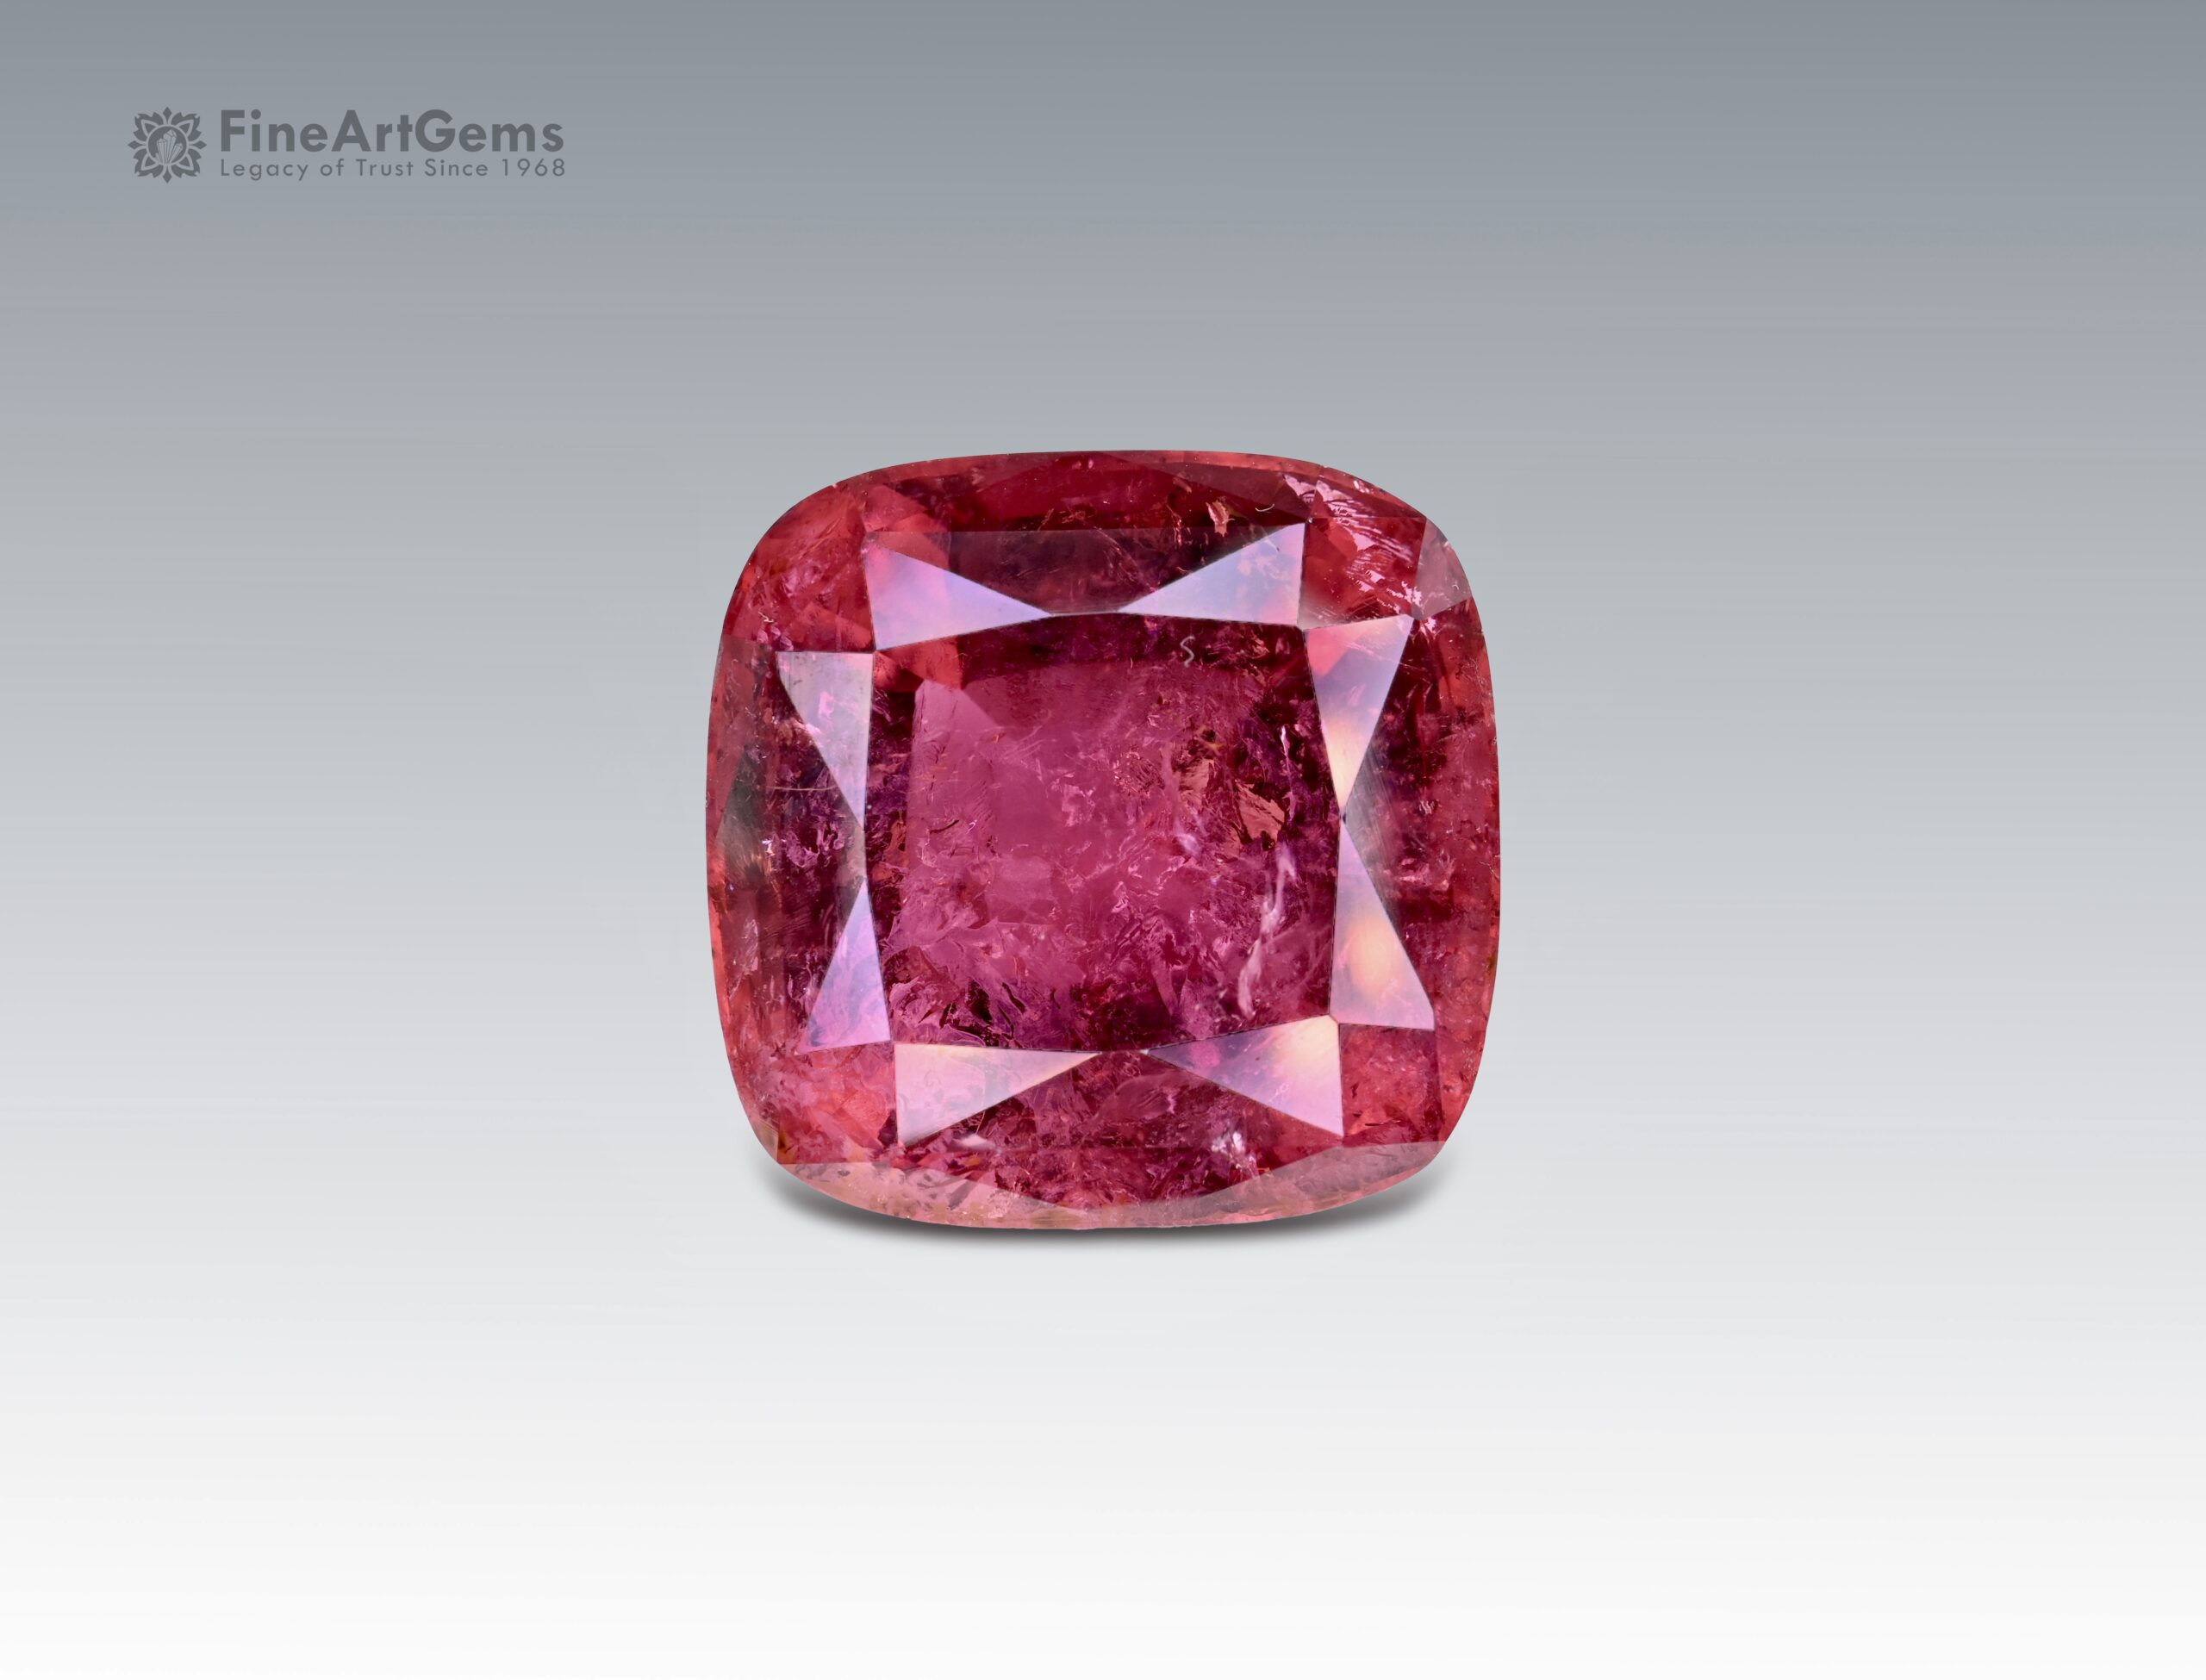 52 Carats Gorgeous Rubellite Tourmaline Gemstone from Afghanistan